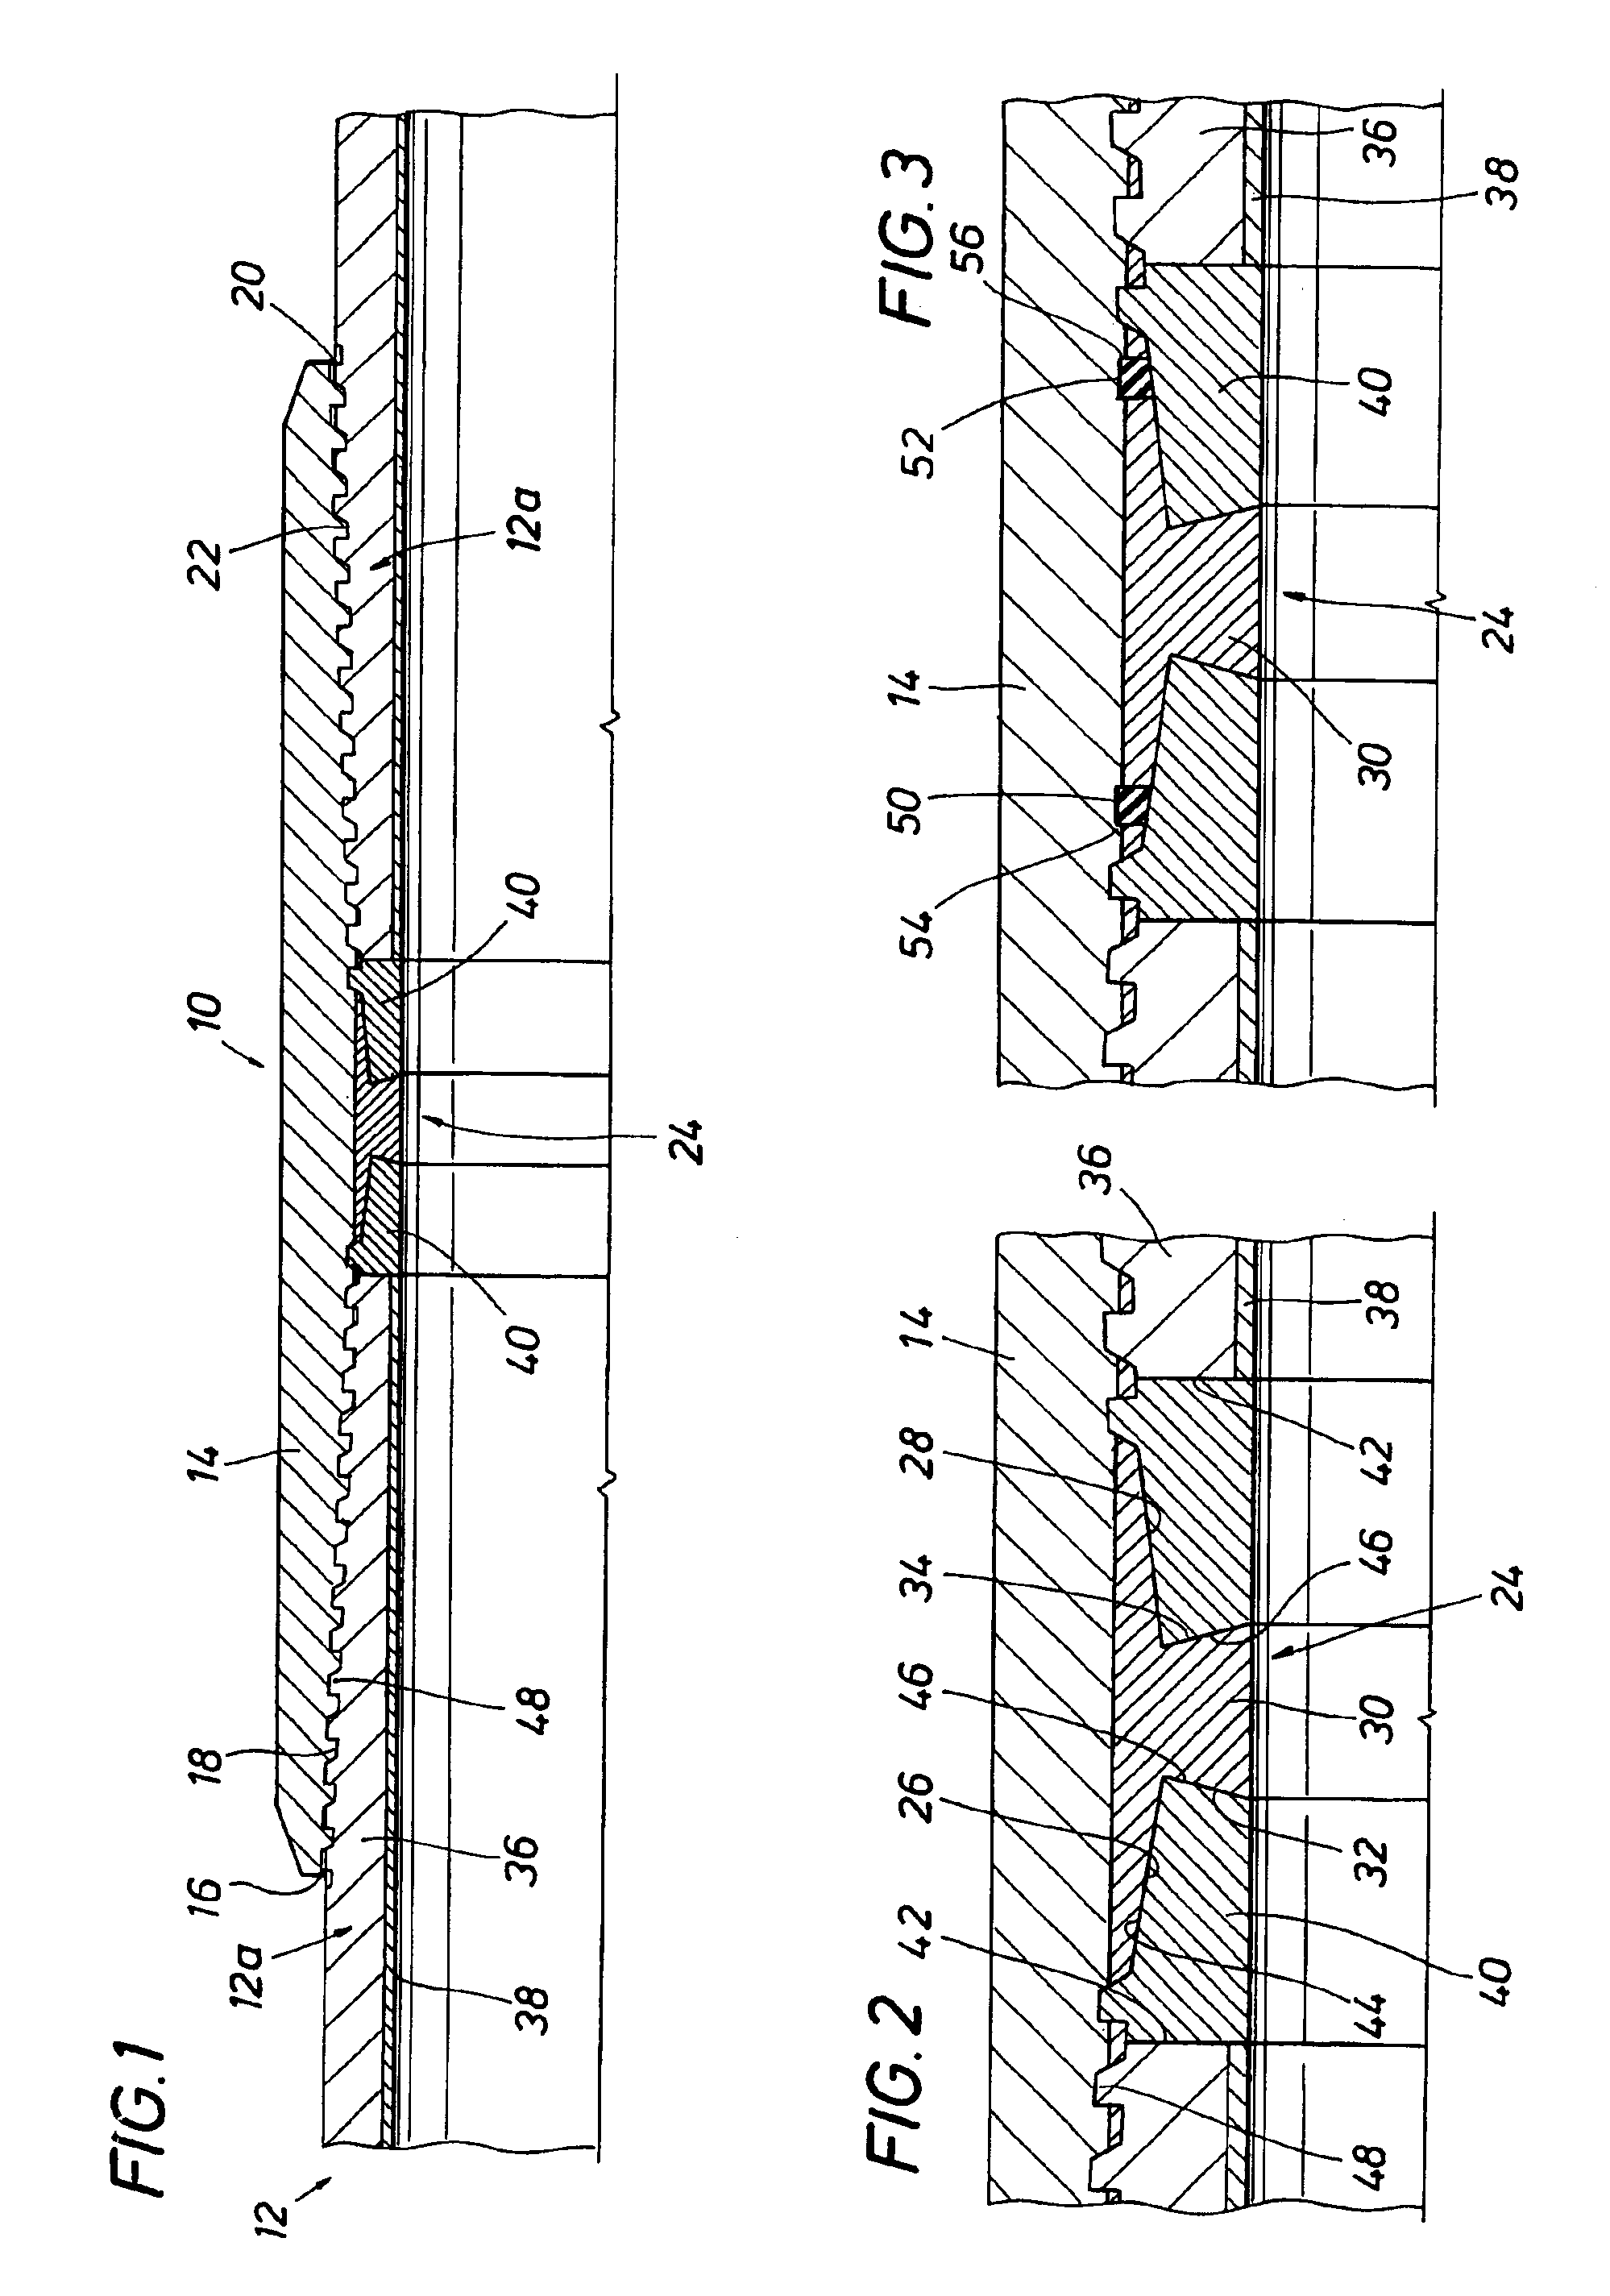 Threaded connection for internally clad pipe